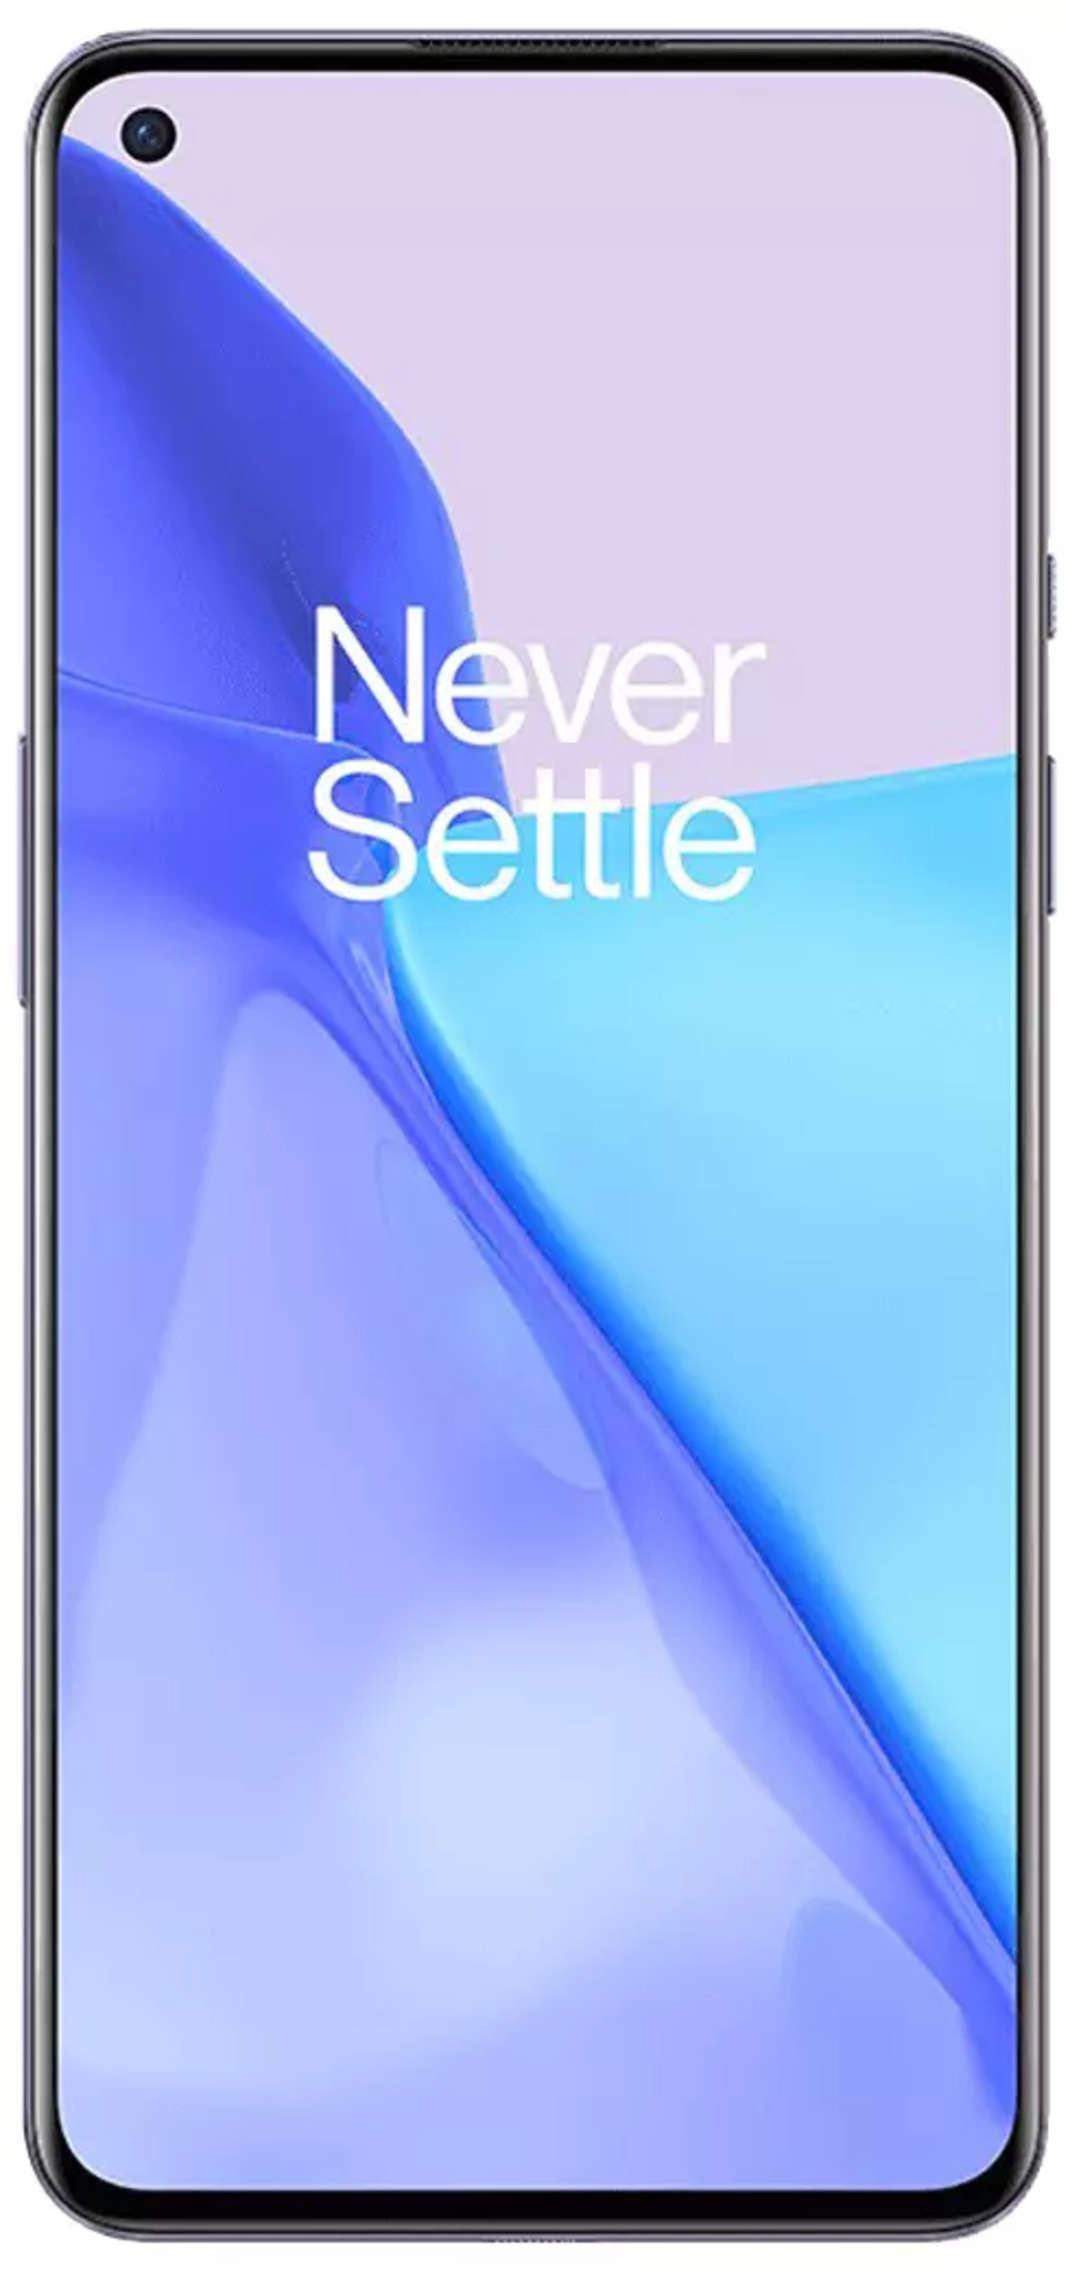 Oneplus 9 Vs Oneplus 9 Pro Vs Oneplus 9r 5g Compare Specifications Price Gadgets Now